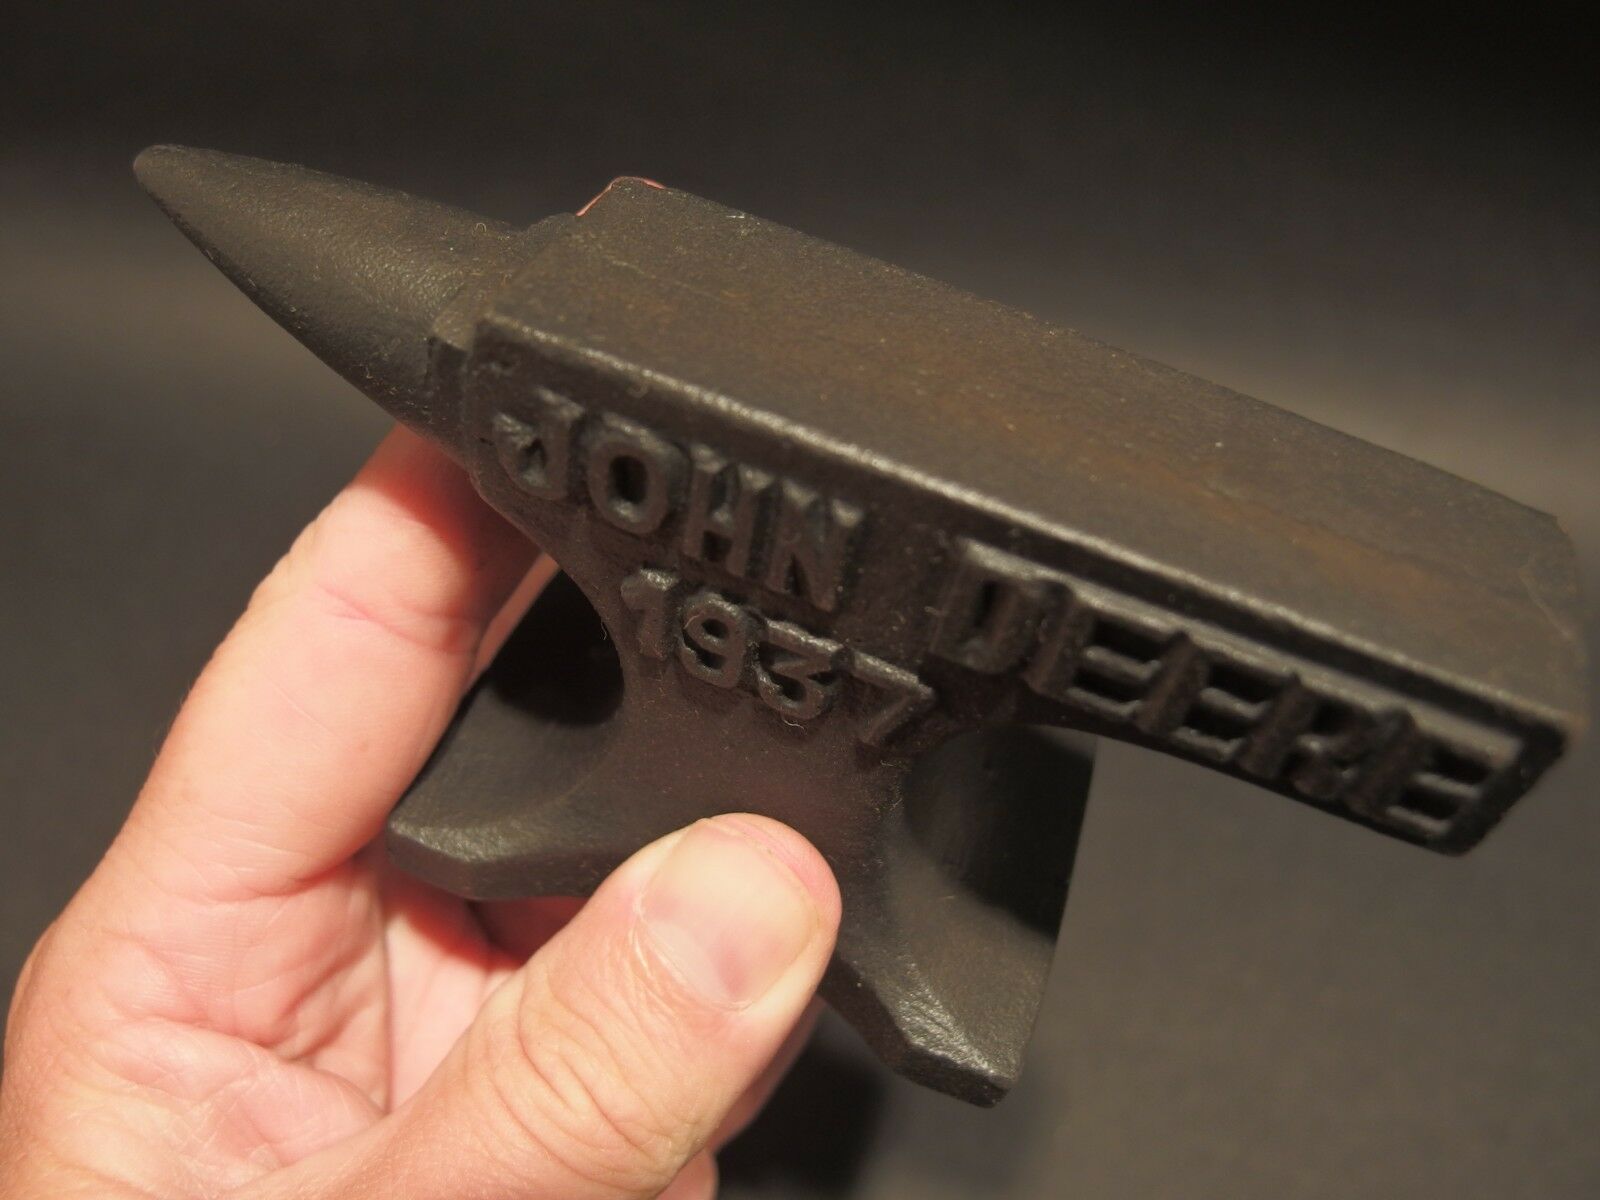 Sold at Auction: 1937 JOHN DEERE MINI CAST IRON ANVIL PAPER WEIGHT